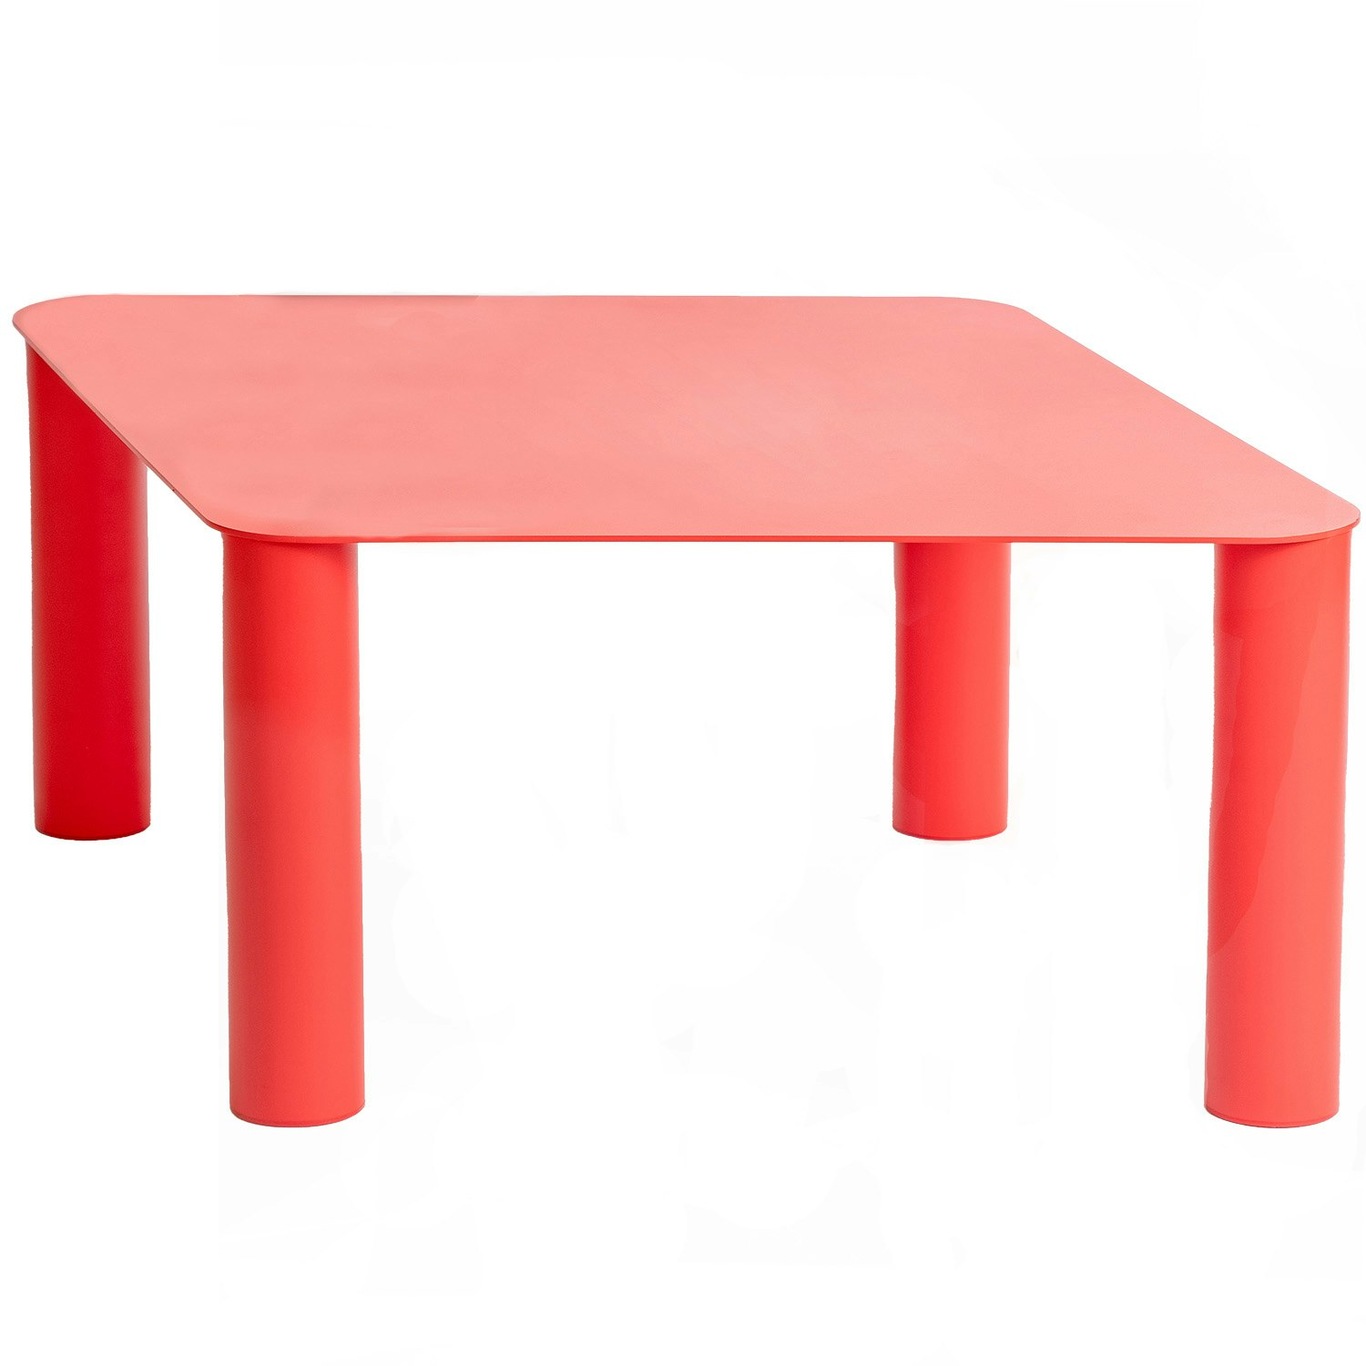 Pipeline Coffee Table, Red